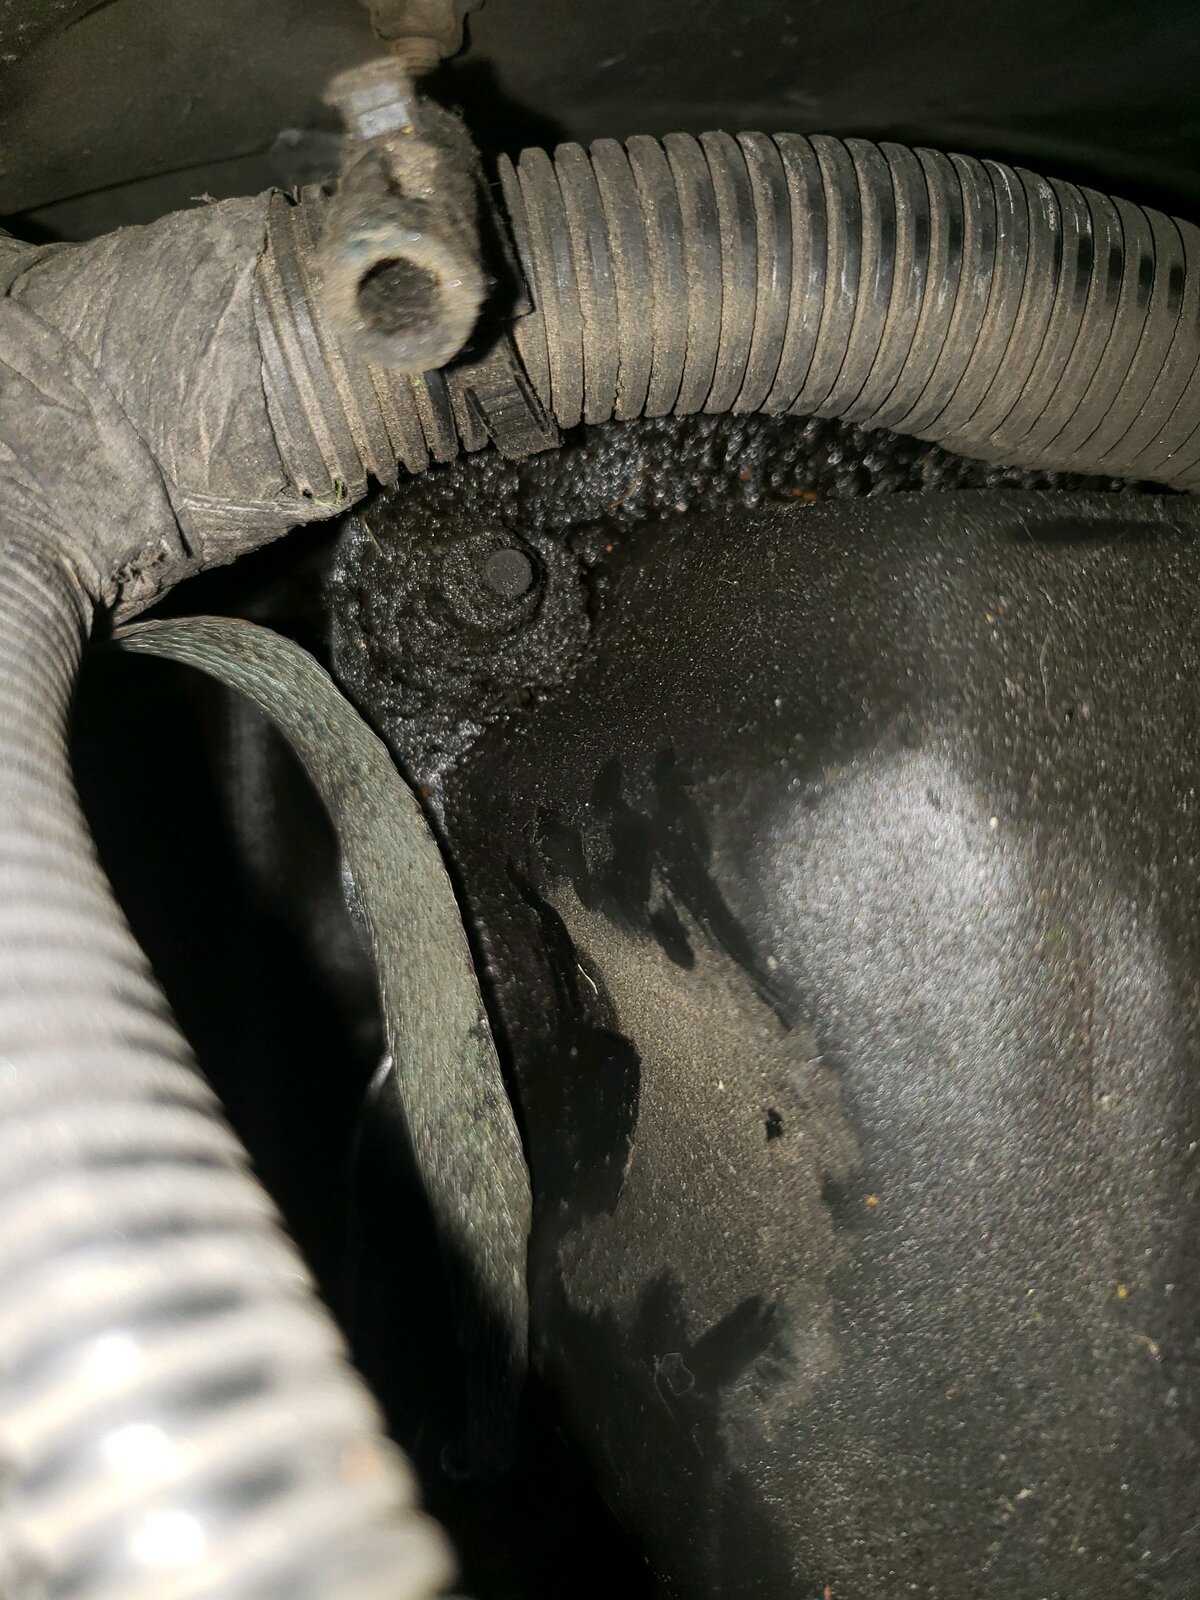 Can You Over-Tighten the Valve Cover Bolts?